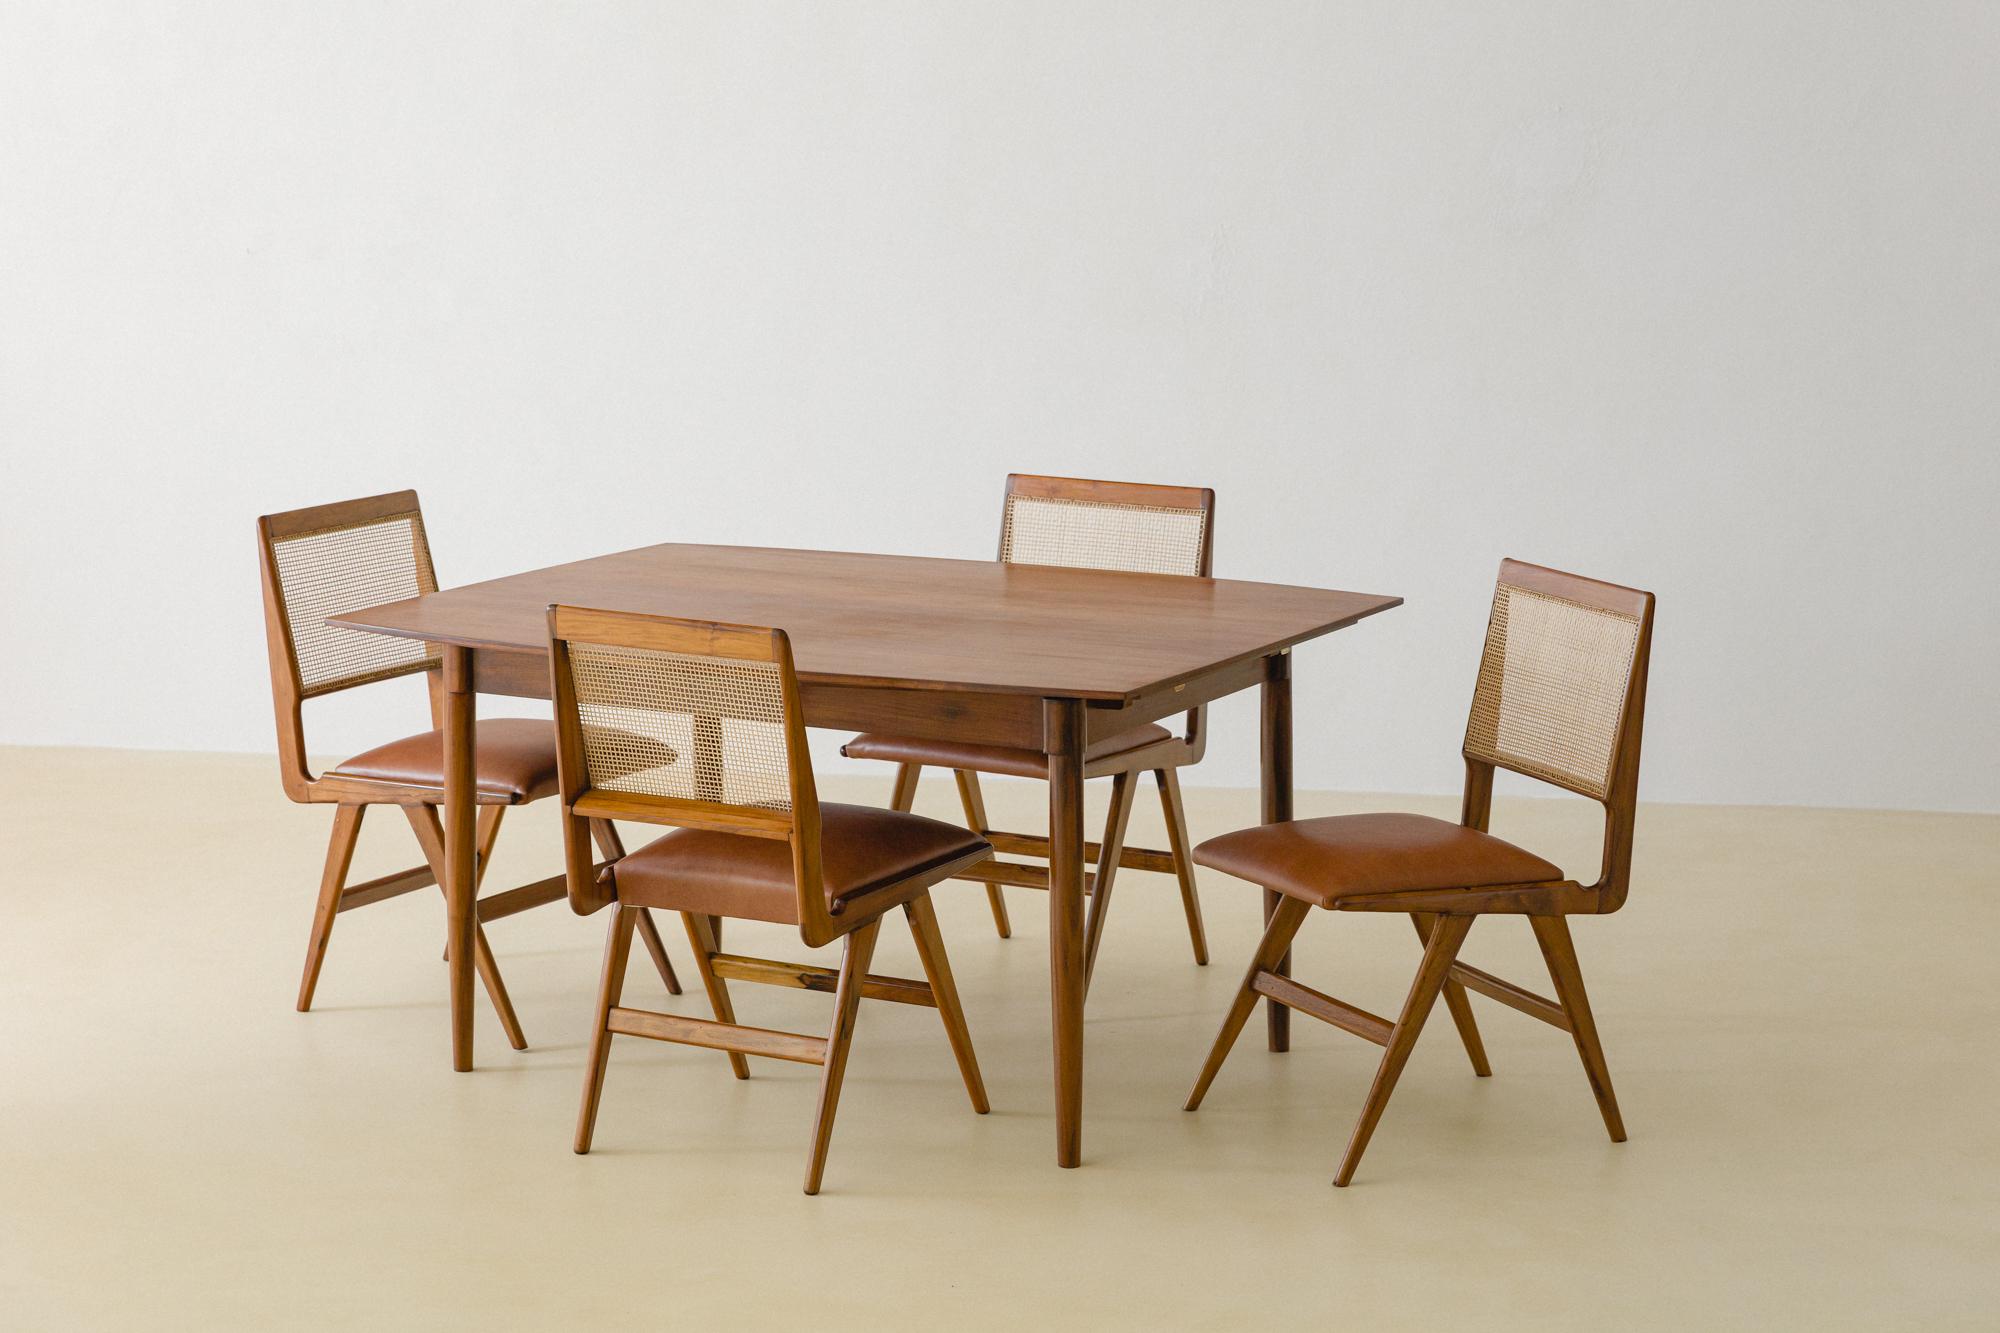 Expandable Dining Table in Caviuna by Carlo Hauner, Brazilian Midcentury, 1950s For Sale 3